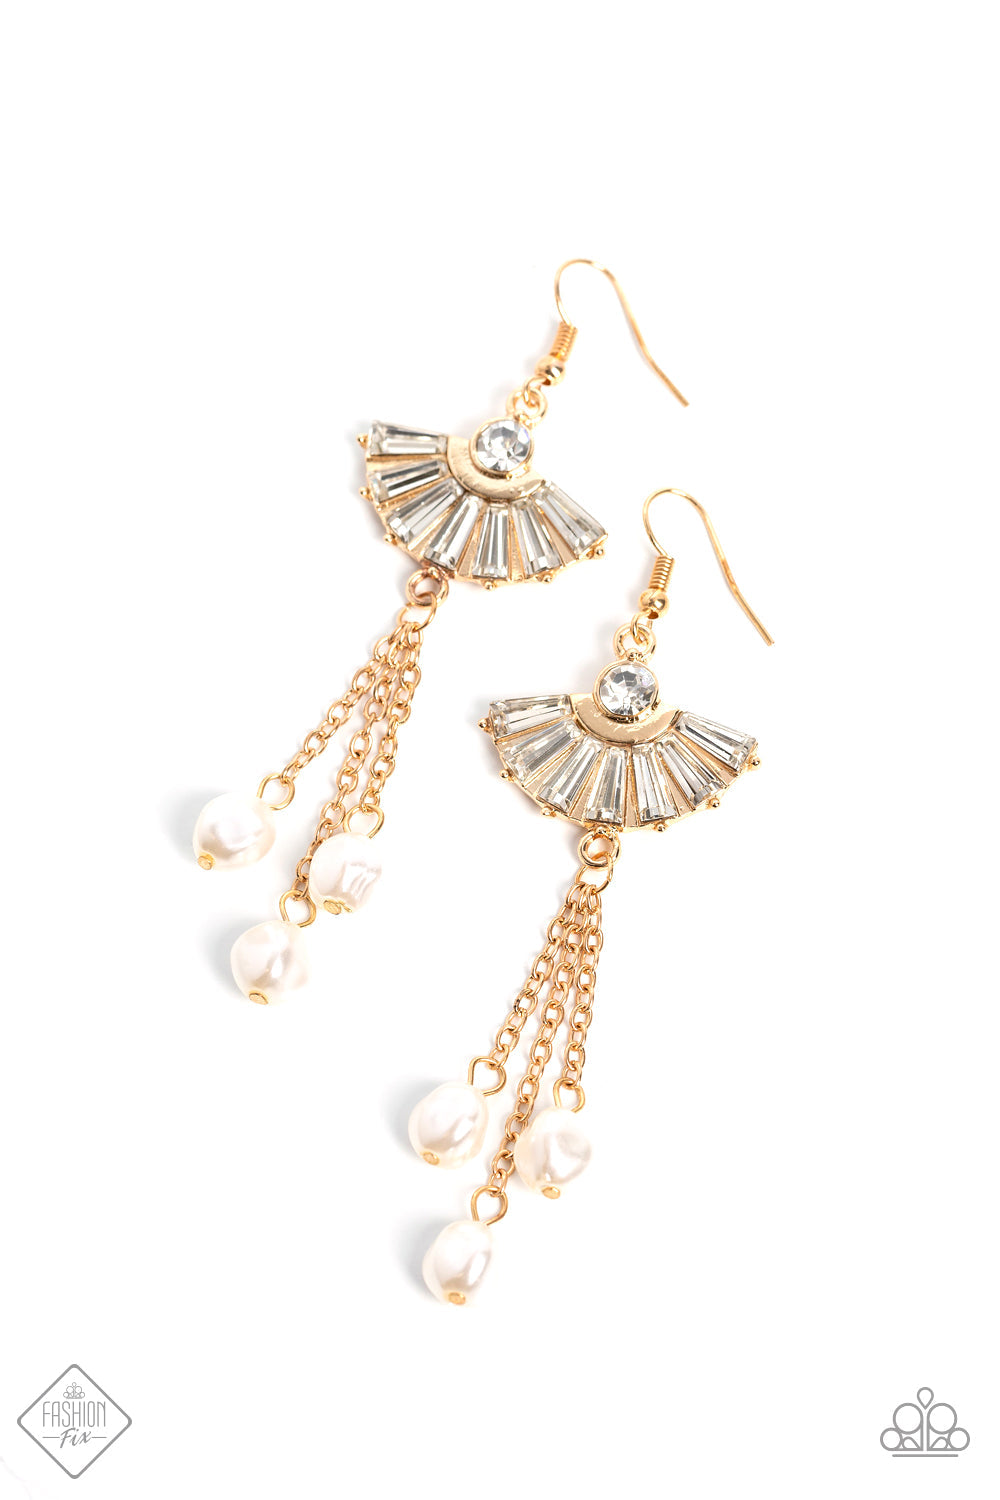 London Season Lure - Gold Earrings - Paparazzi Accessories - Glassy, emerald-cut gems fan out around a solitaire rhinestone, creating a semicircle of glitz encased in gold. Each polished gem is pressed into pronged fittings, ensuring maximum sparkle as the light catches each angle. Gold chains stream from the bottom of the fanned-out gems above, leading to a trio of baroque pearls for a romantic finish. Earring attaches to a standard fishhook fitting. Sold as one pair of earrings.